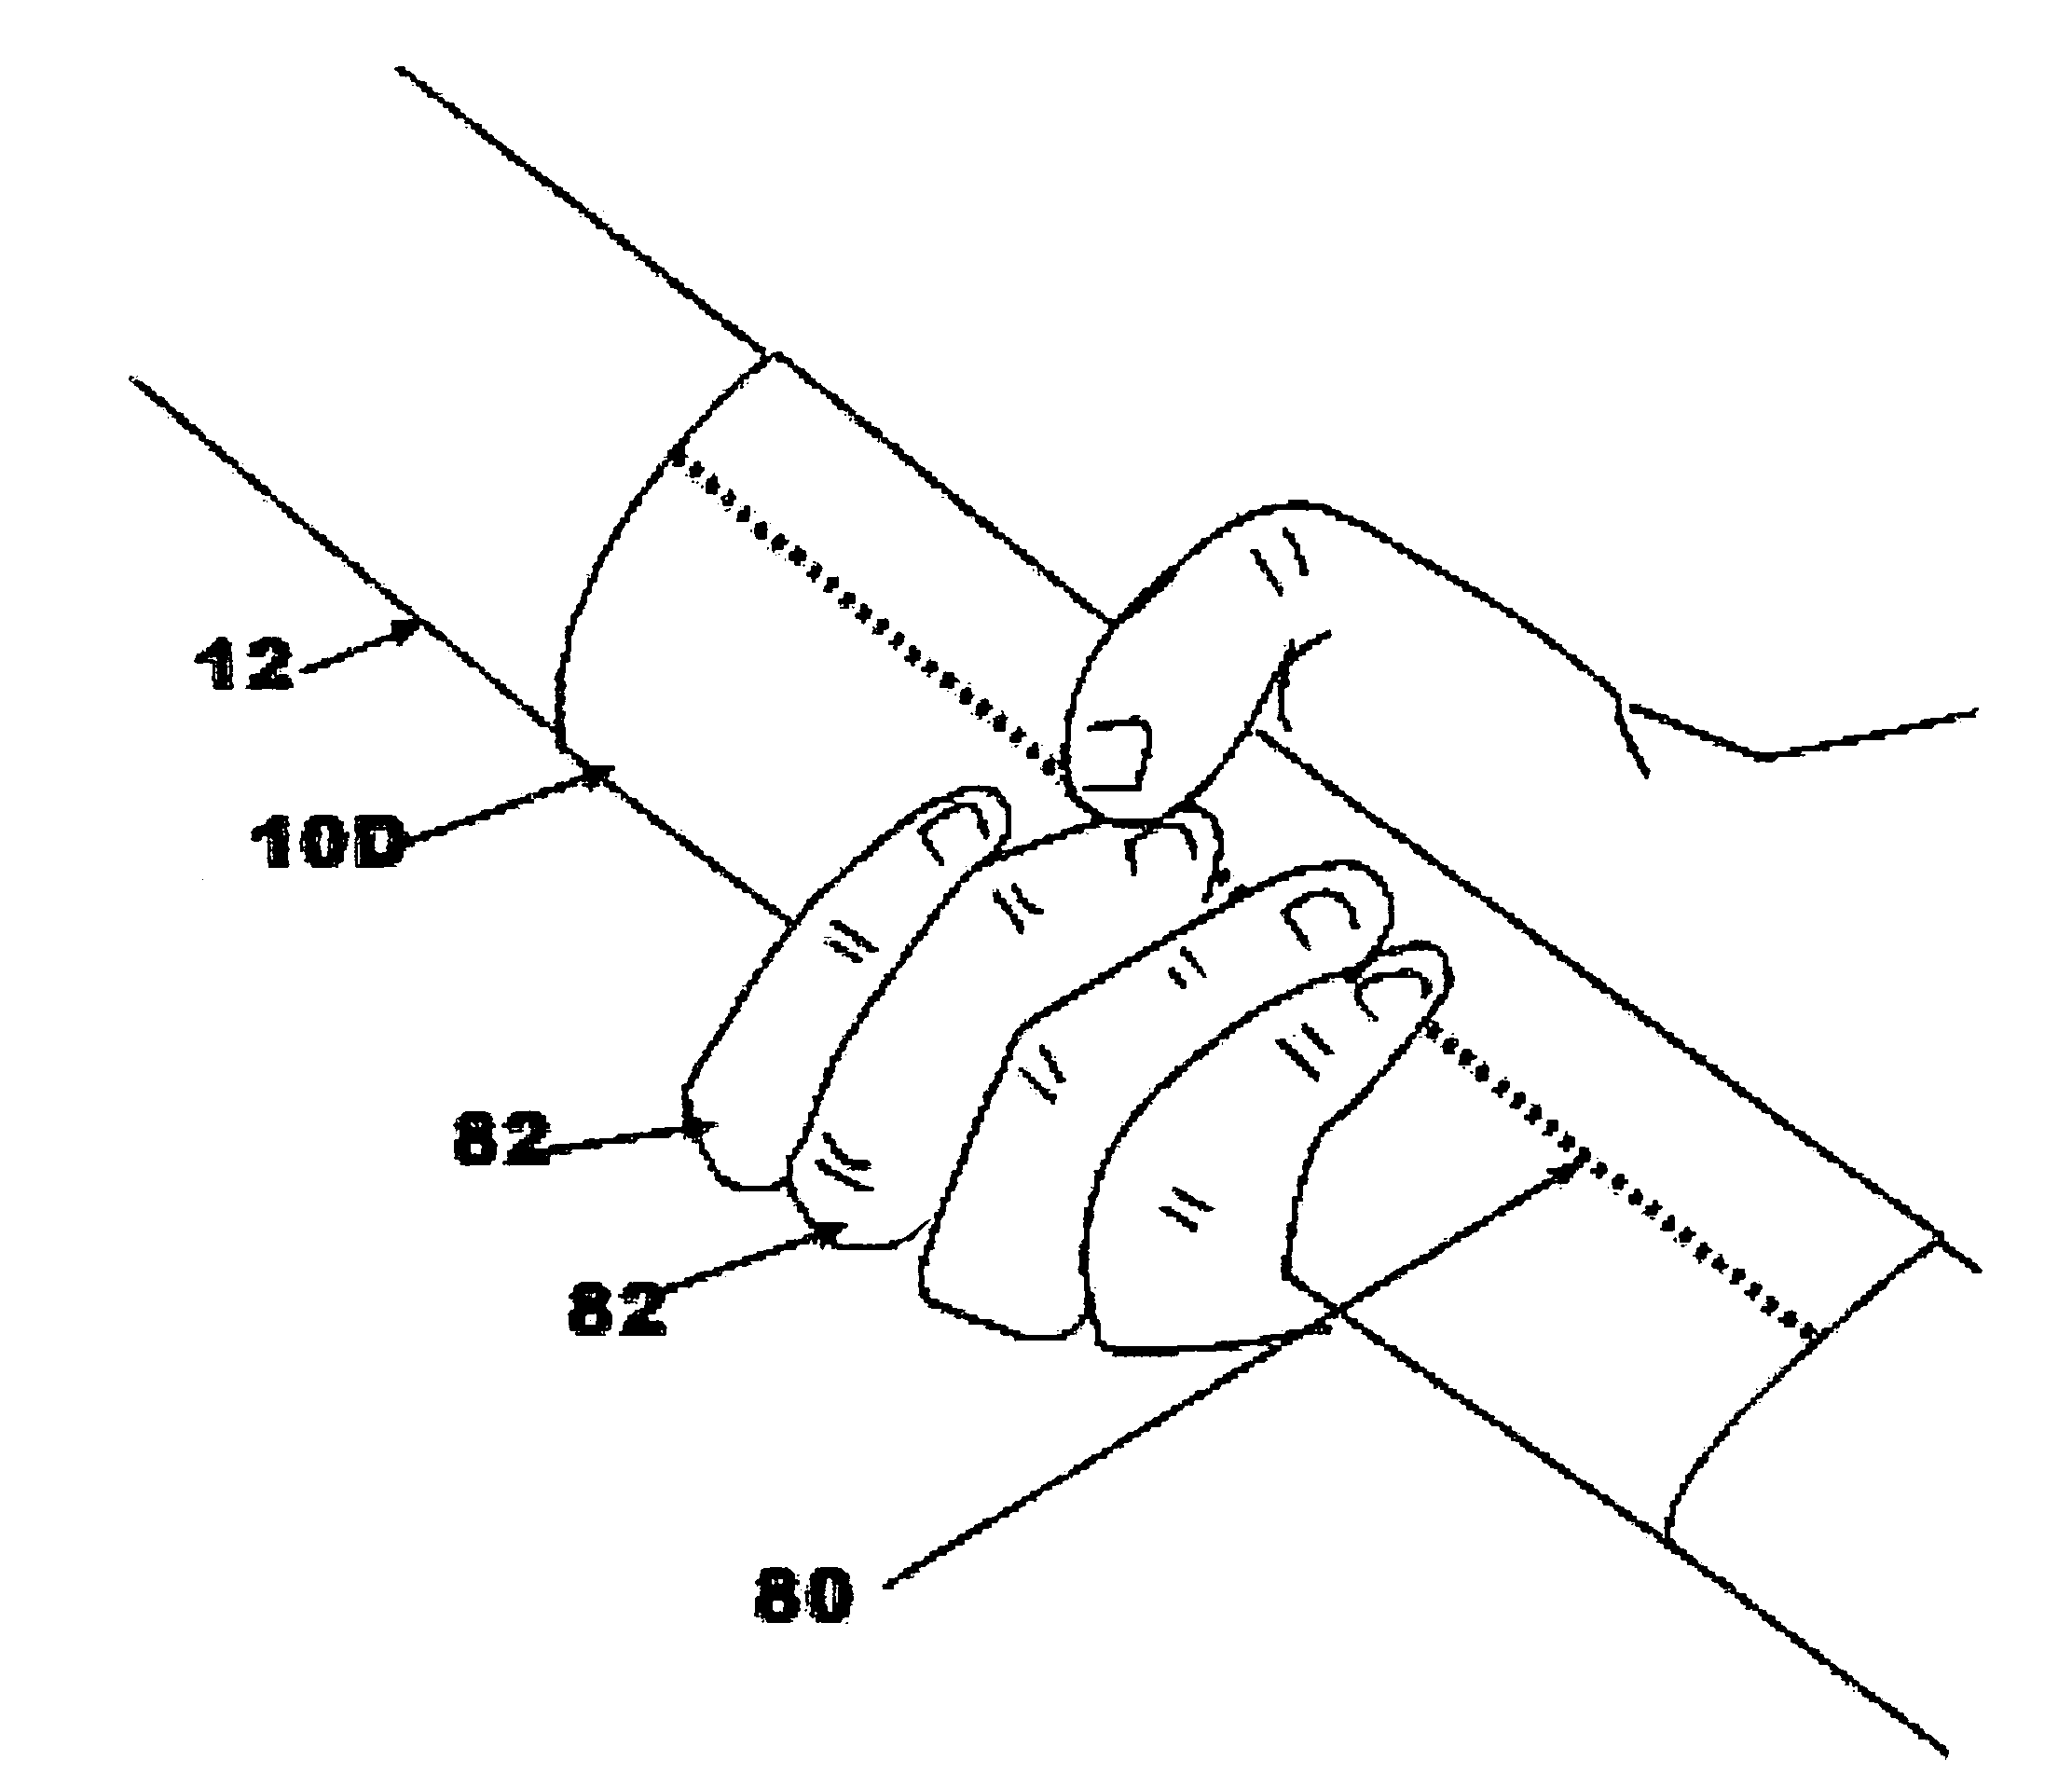 Paddle hand grips and method for making and using same